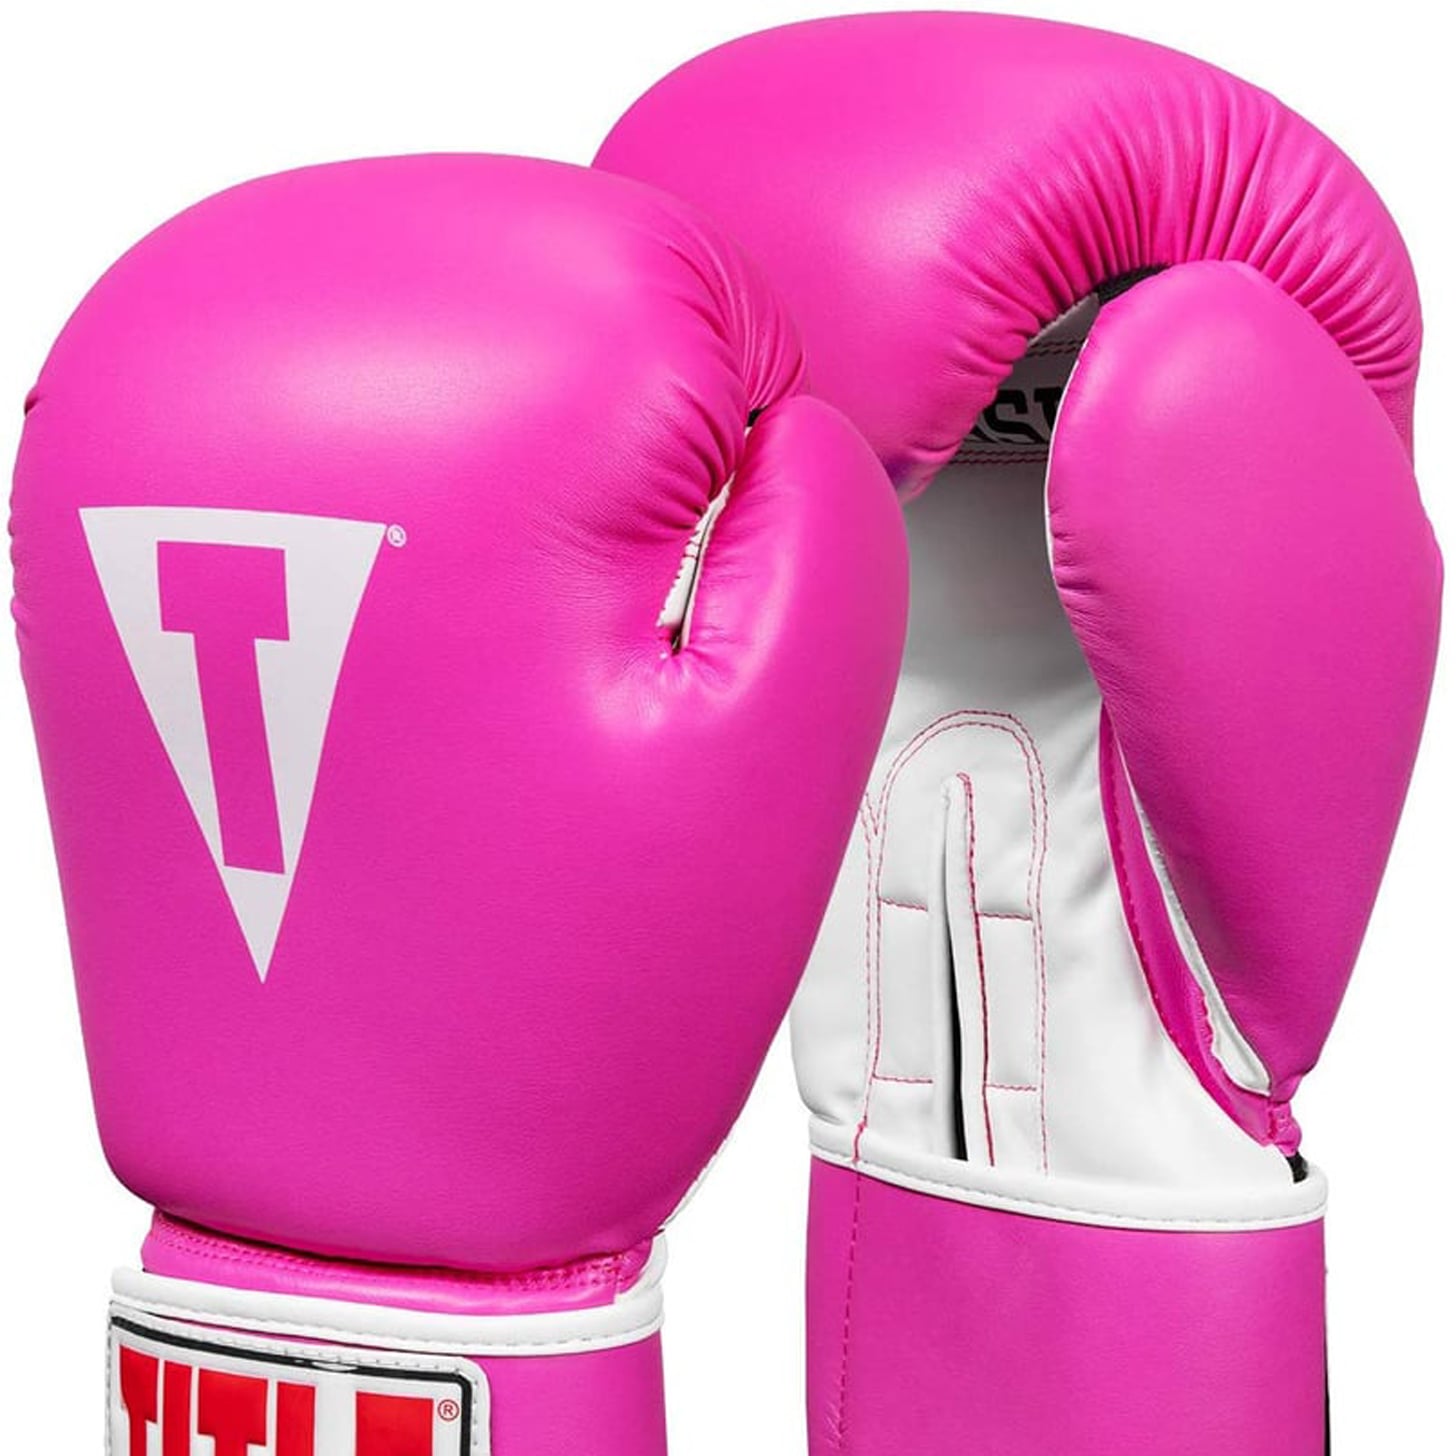 Workout/Fitness/Boxing PILOXING Women Weighted Gloves Pink & Black 1/2 Lb Each 